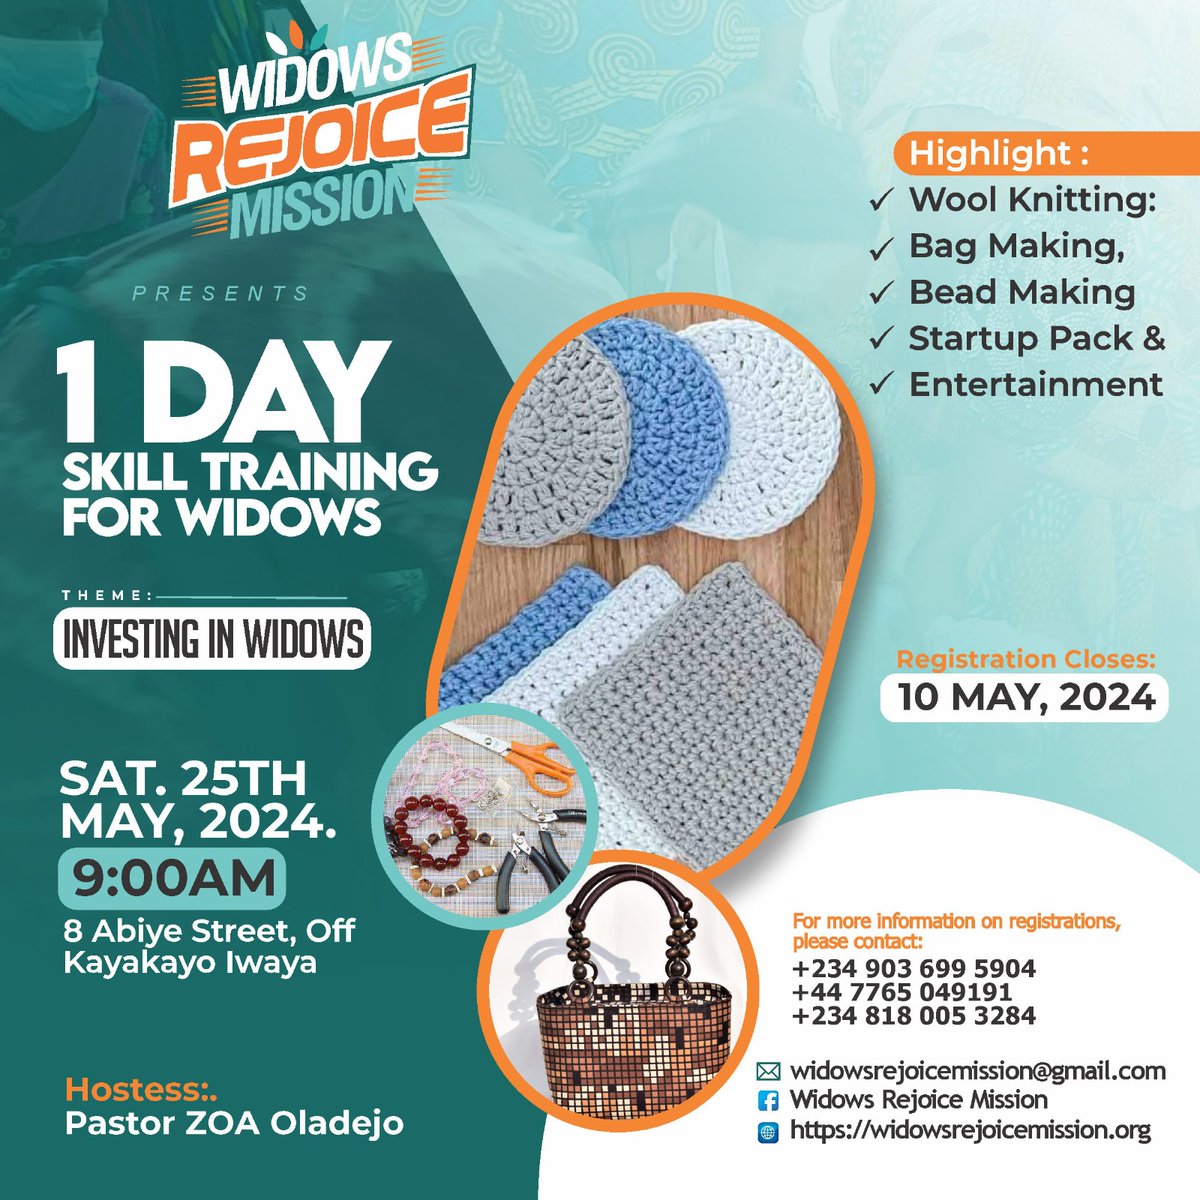 We are ready to train Widows at #MAKOKO and #IWAYA area of #Lagos. Date: 25th May, 2024 Time: 9am Venue: 8 Abiye Street, IWAYA , Lagos. Highlight: Bag Making, Wool Knitting. Bead Making, STARTUP PACK, Entertainment.... For more details and sponsorship, contact: Telephone 📞 :